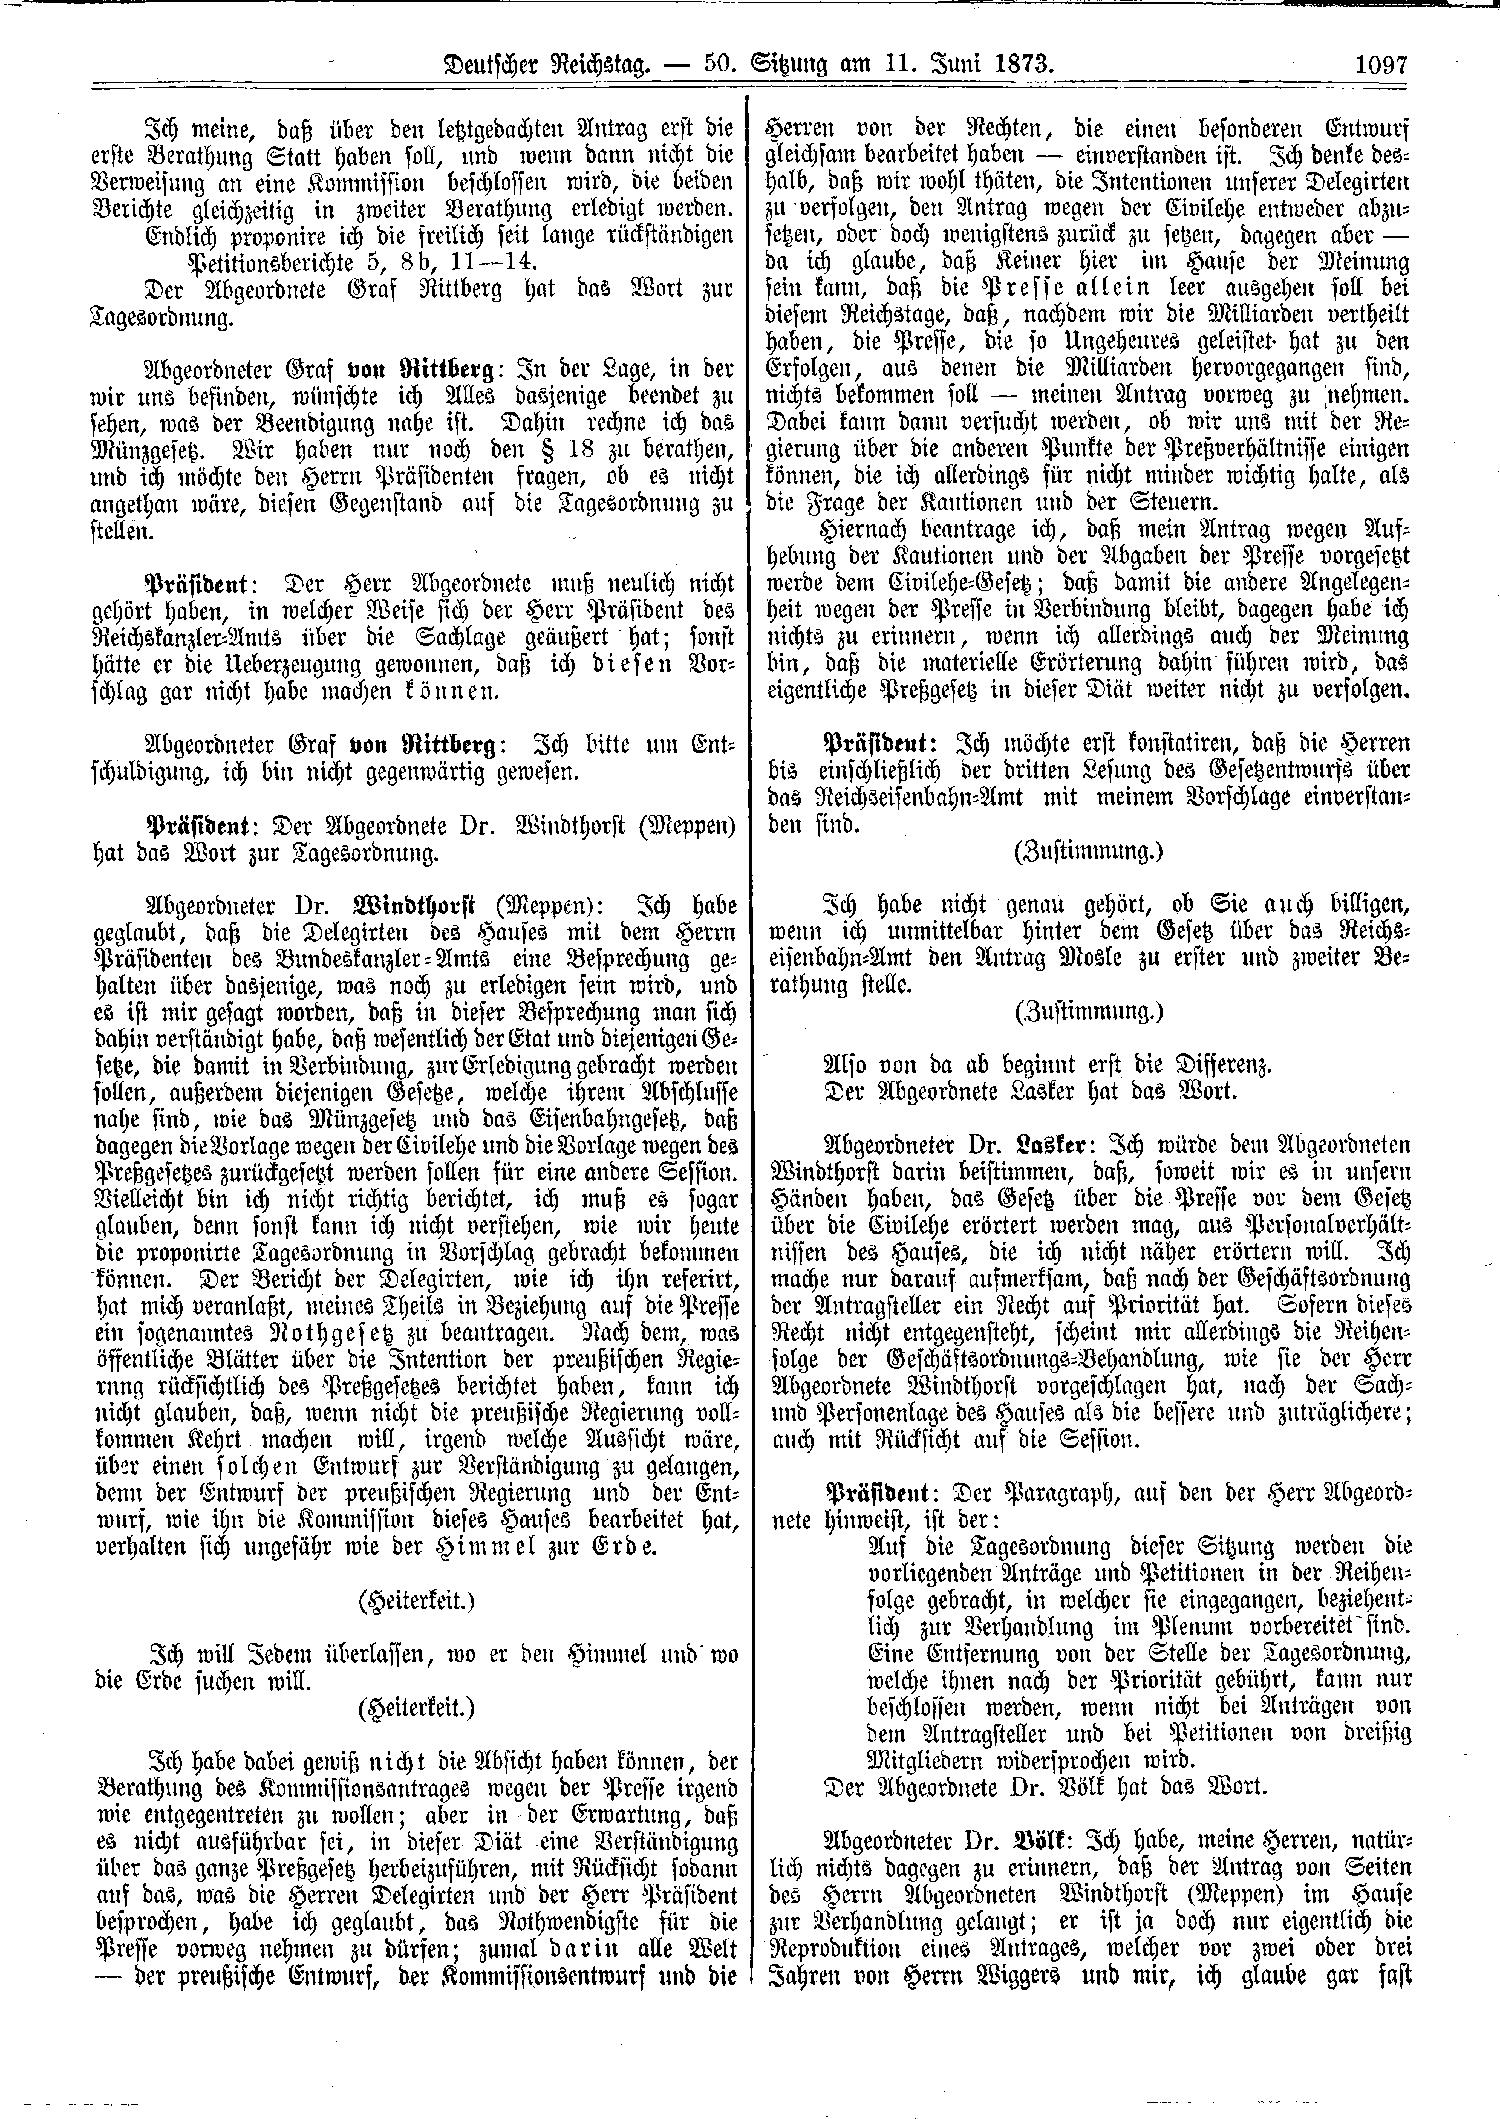 Scan of page 1097